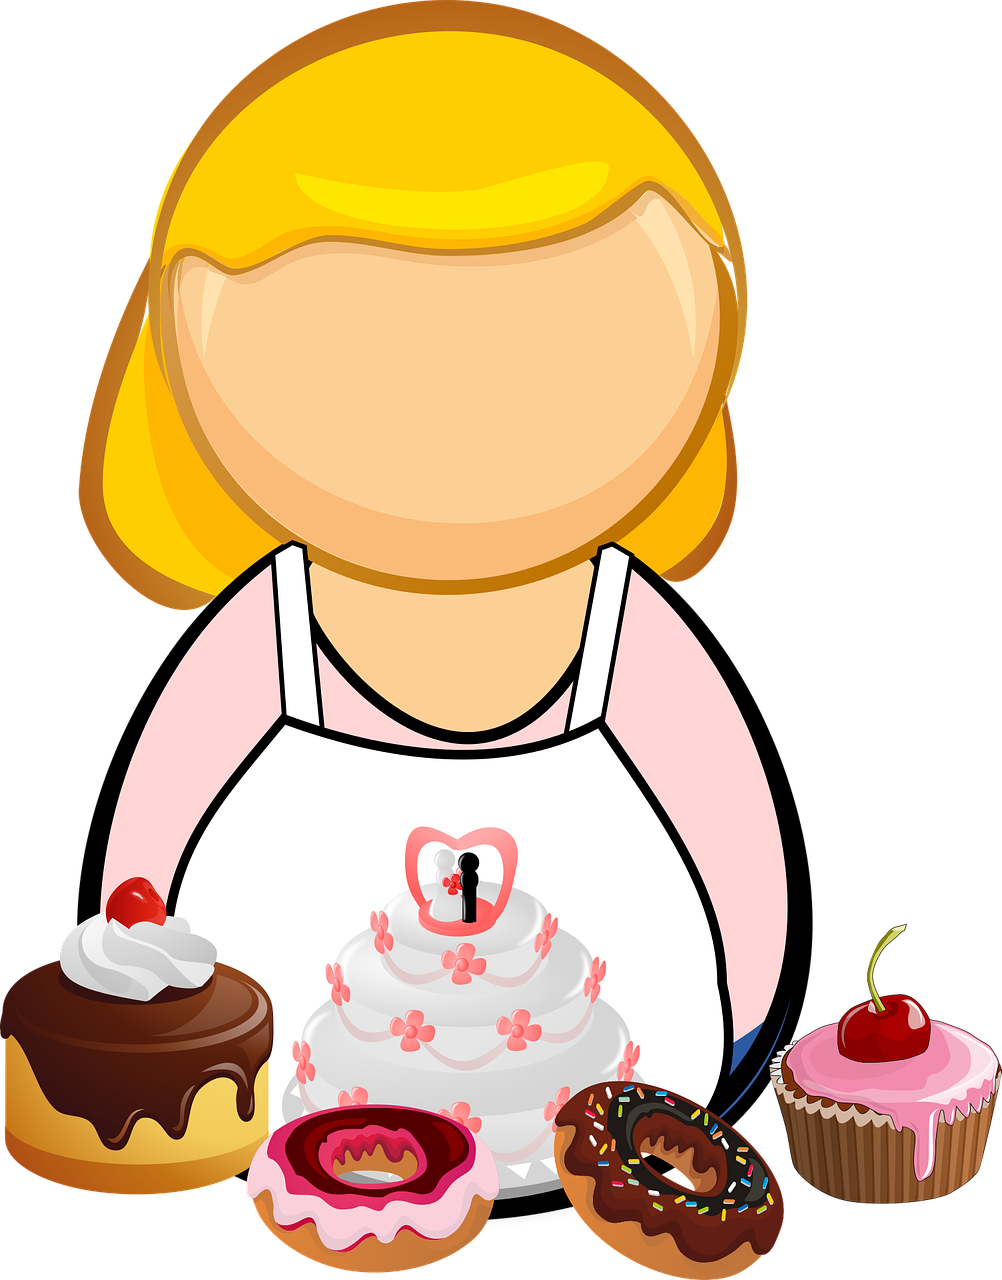 Animated Pastry Chef With Desserts